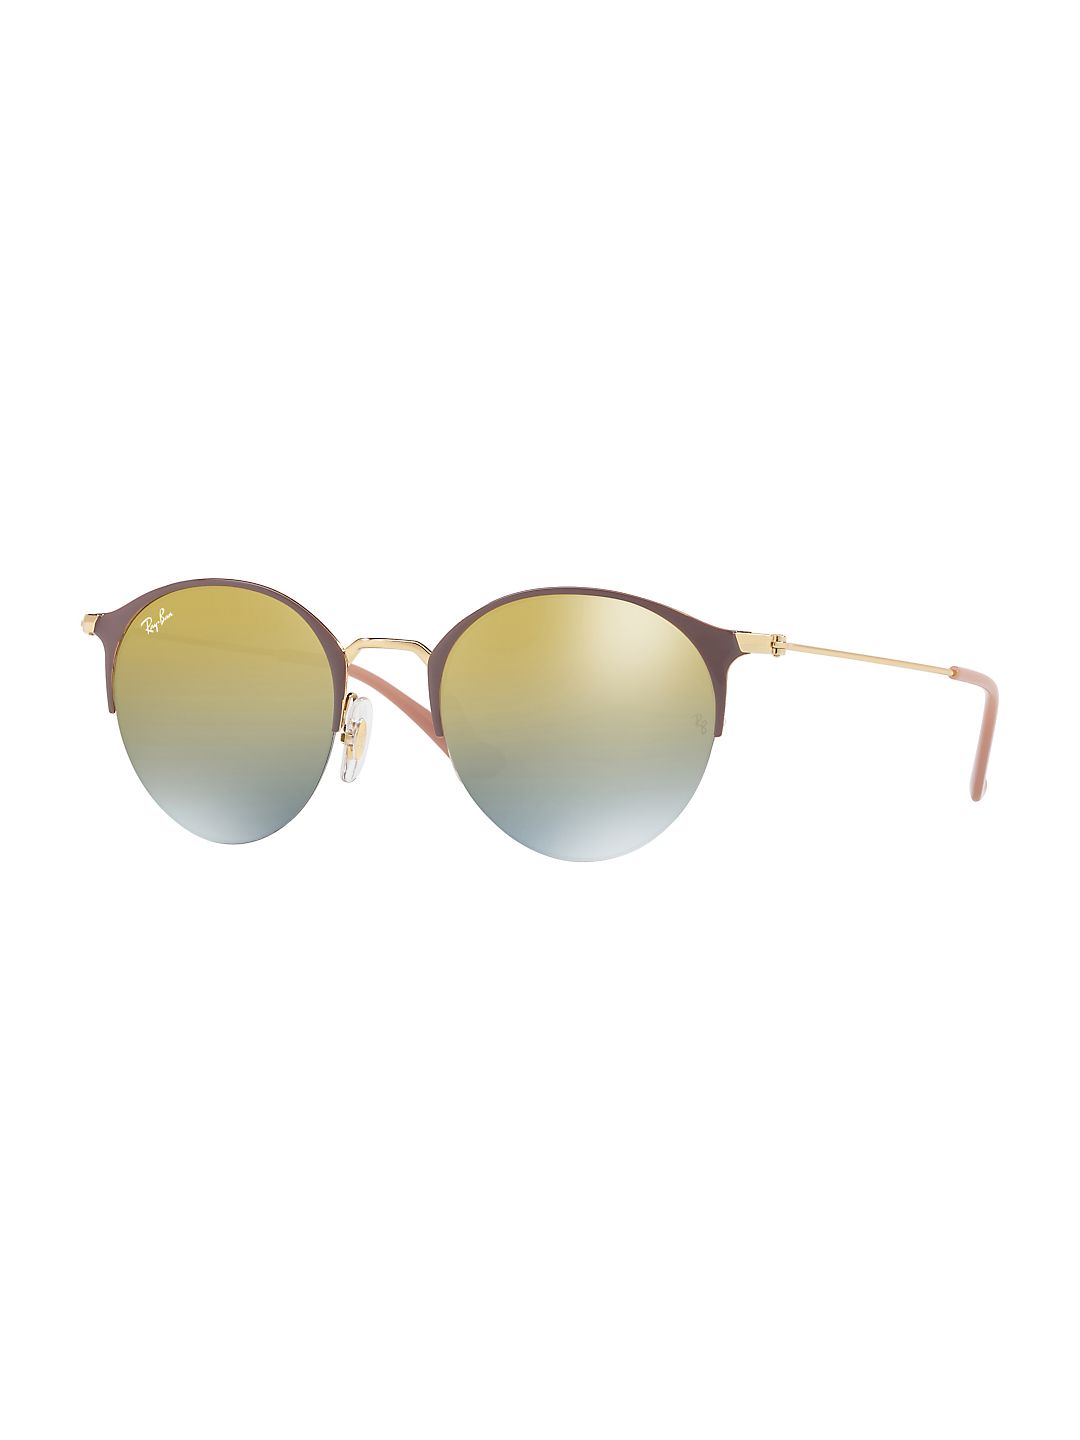 Ray-Ban Unisex RB3578 Round Metal Sunglasses, 50mm - image 1 of 2